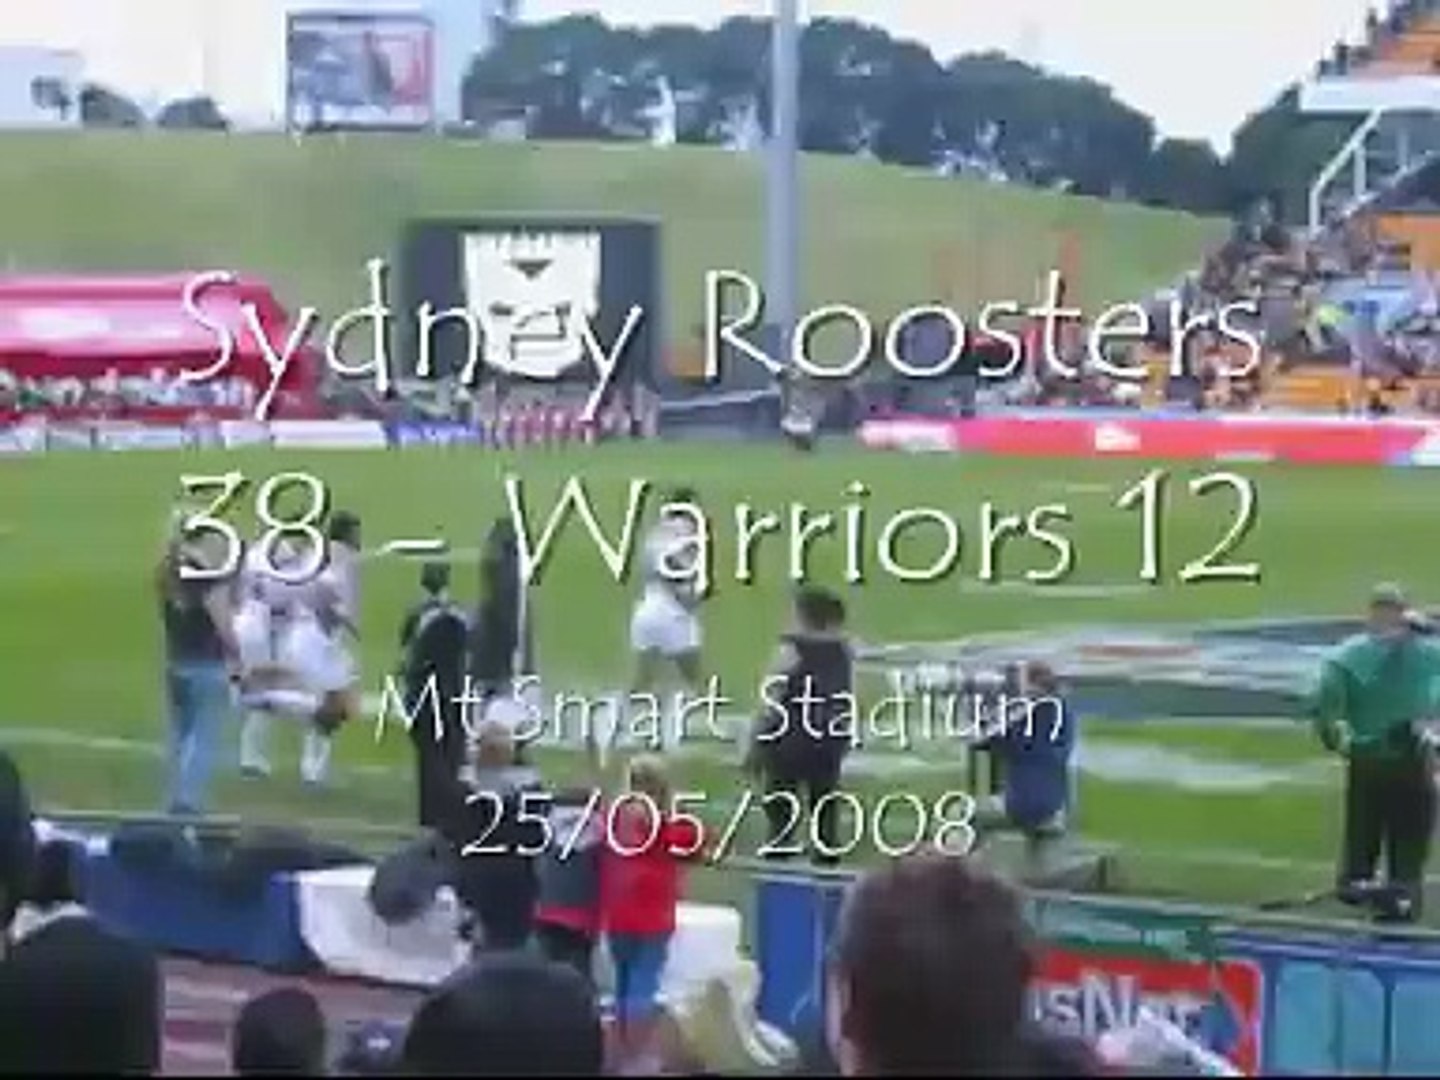 Sydney Roosters V Warriors 2008